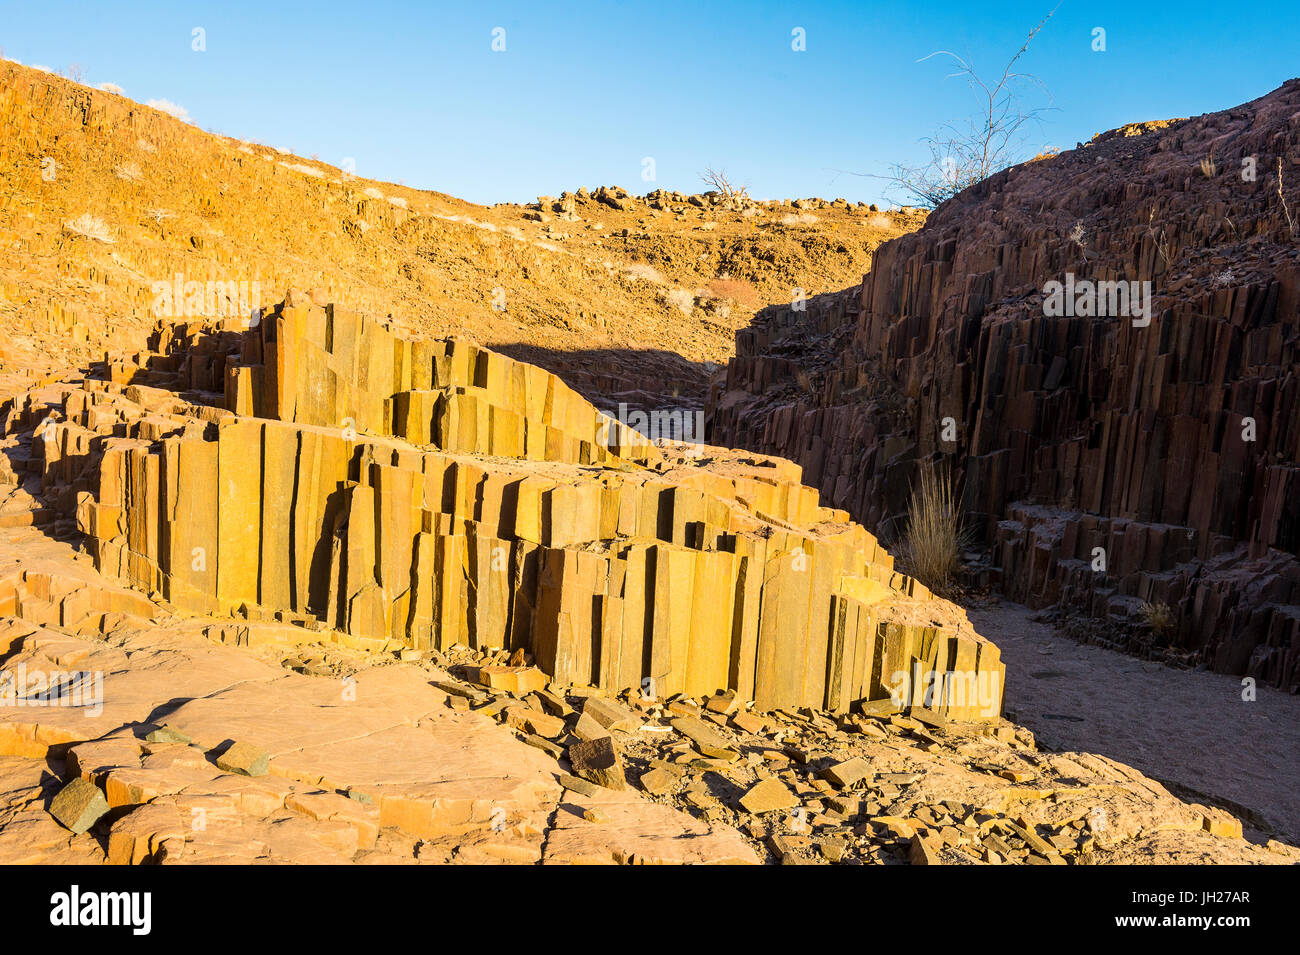 Unusual Organ Pipes monument, Twyfelfontein, Namibia, Africa Stock Photo